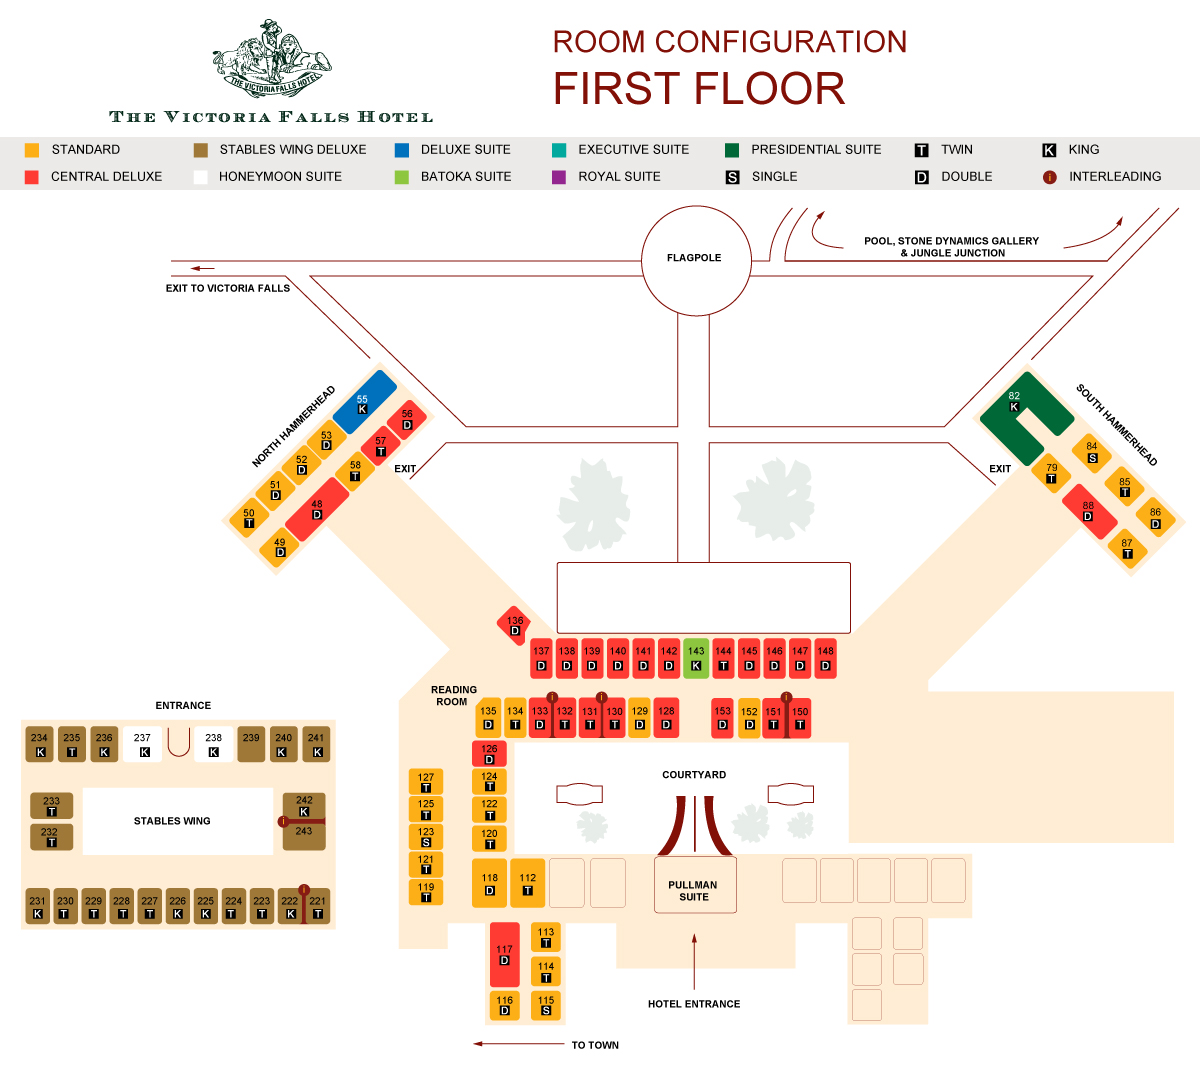 Victoria Falls Hotel first floor layout